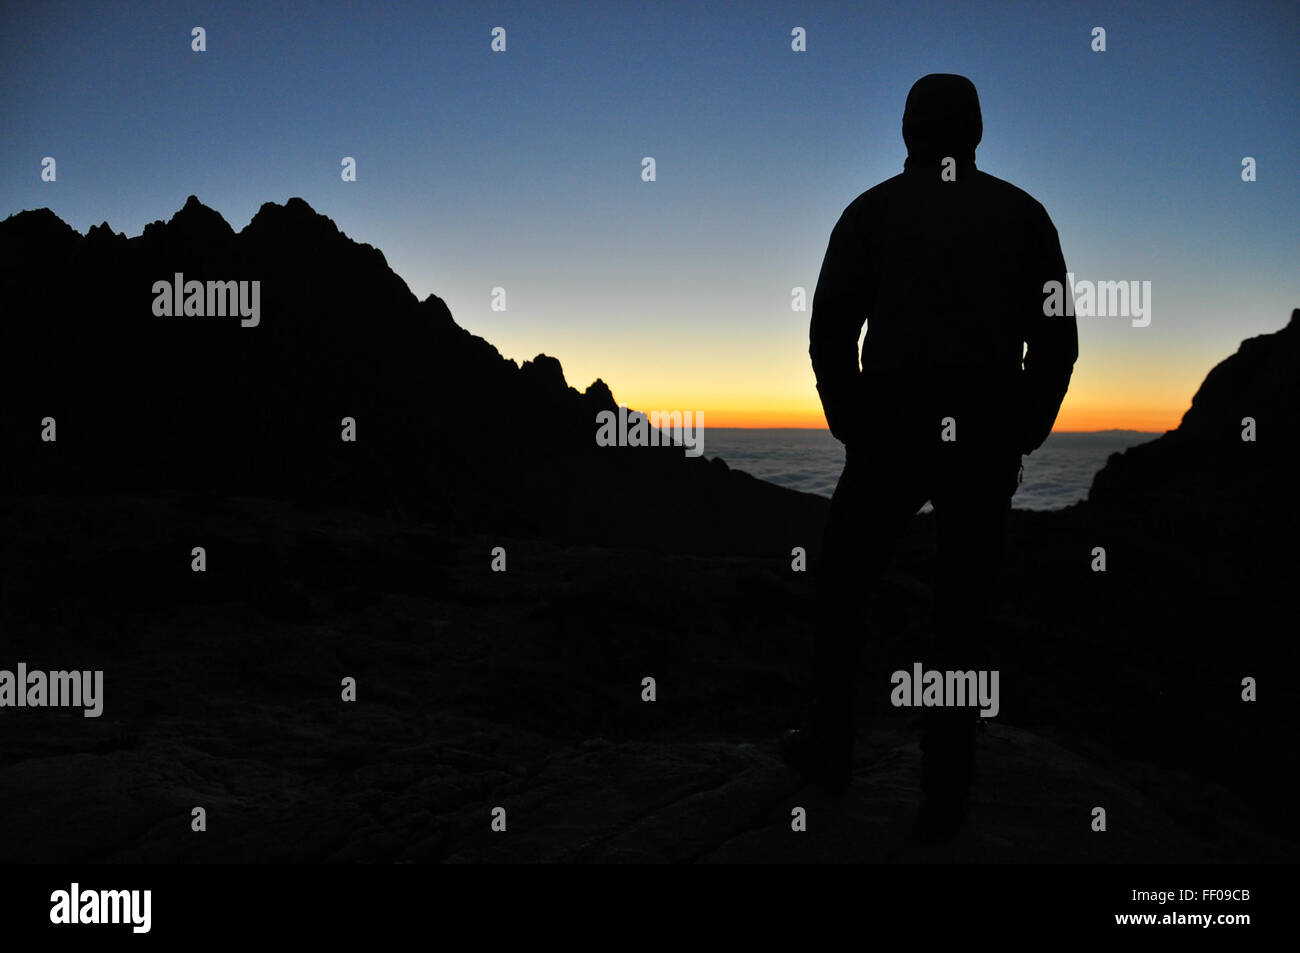 Silhouette of Person Standing on Landscape by Ocean Silhouette of Person Standing on Landscape by Ocean Stock Photo